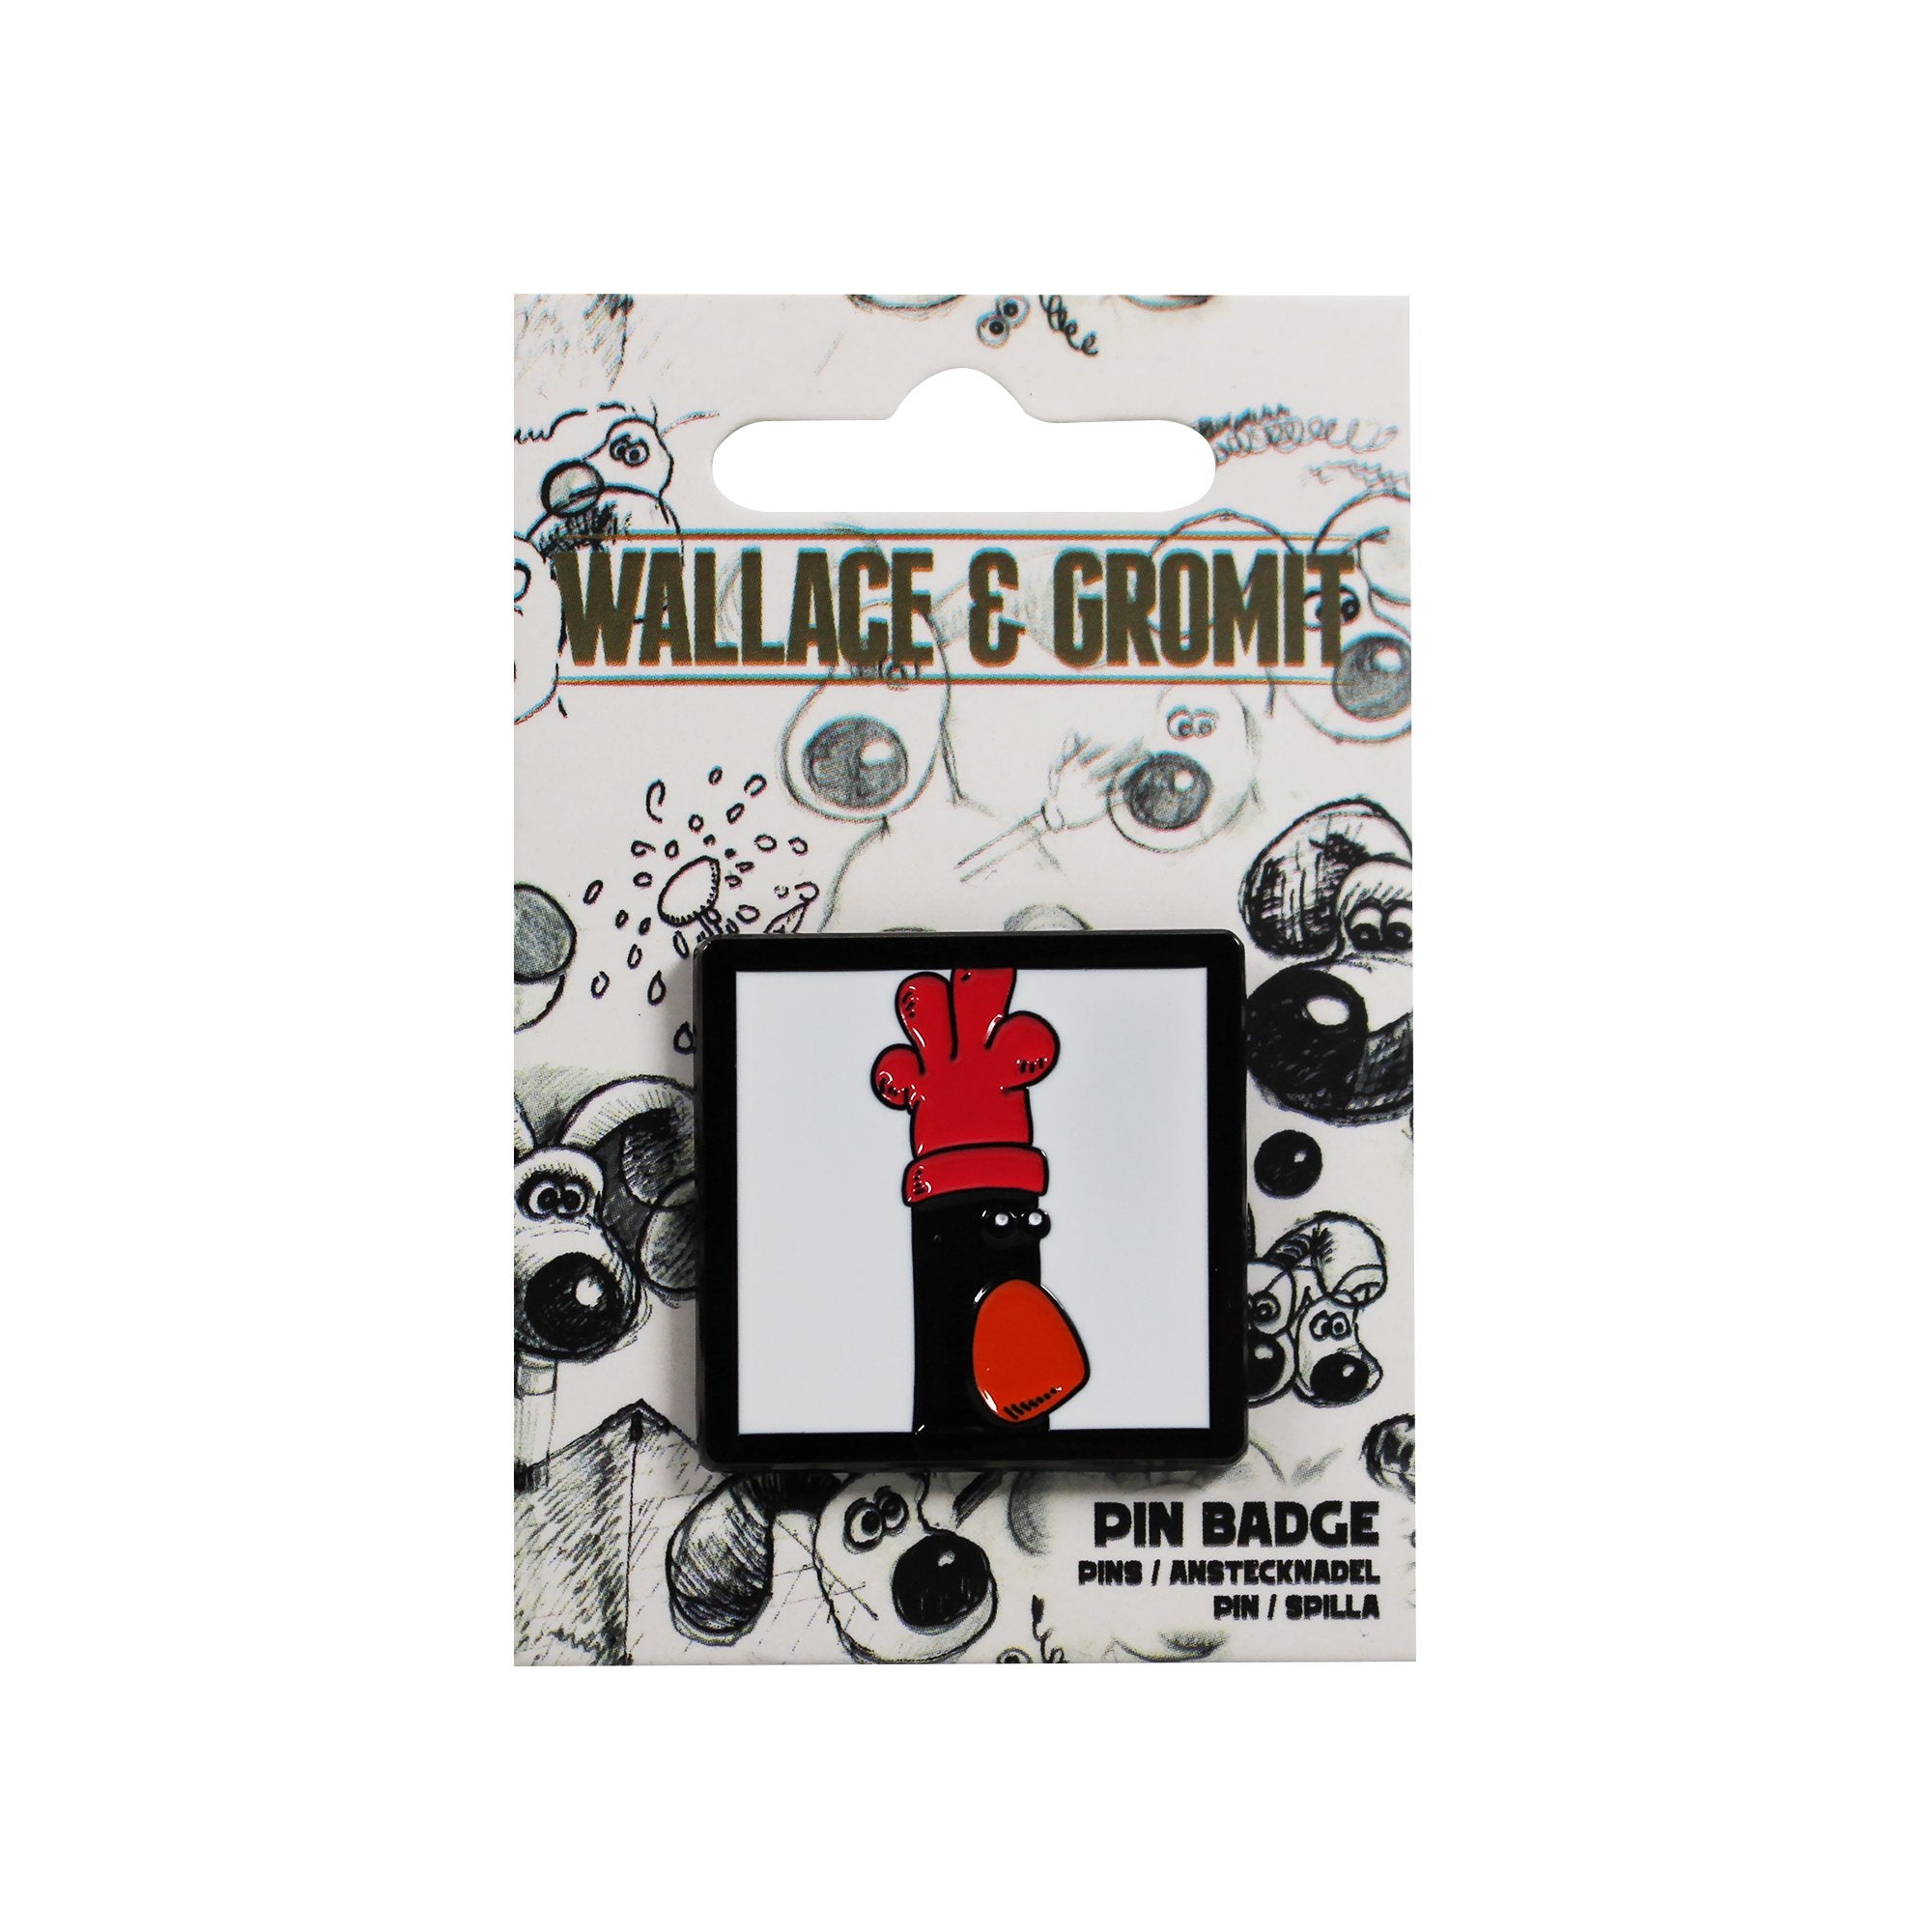 Pin Badge - Wallace & Gromit (Feathers)